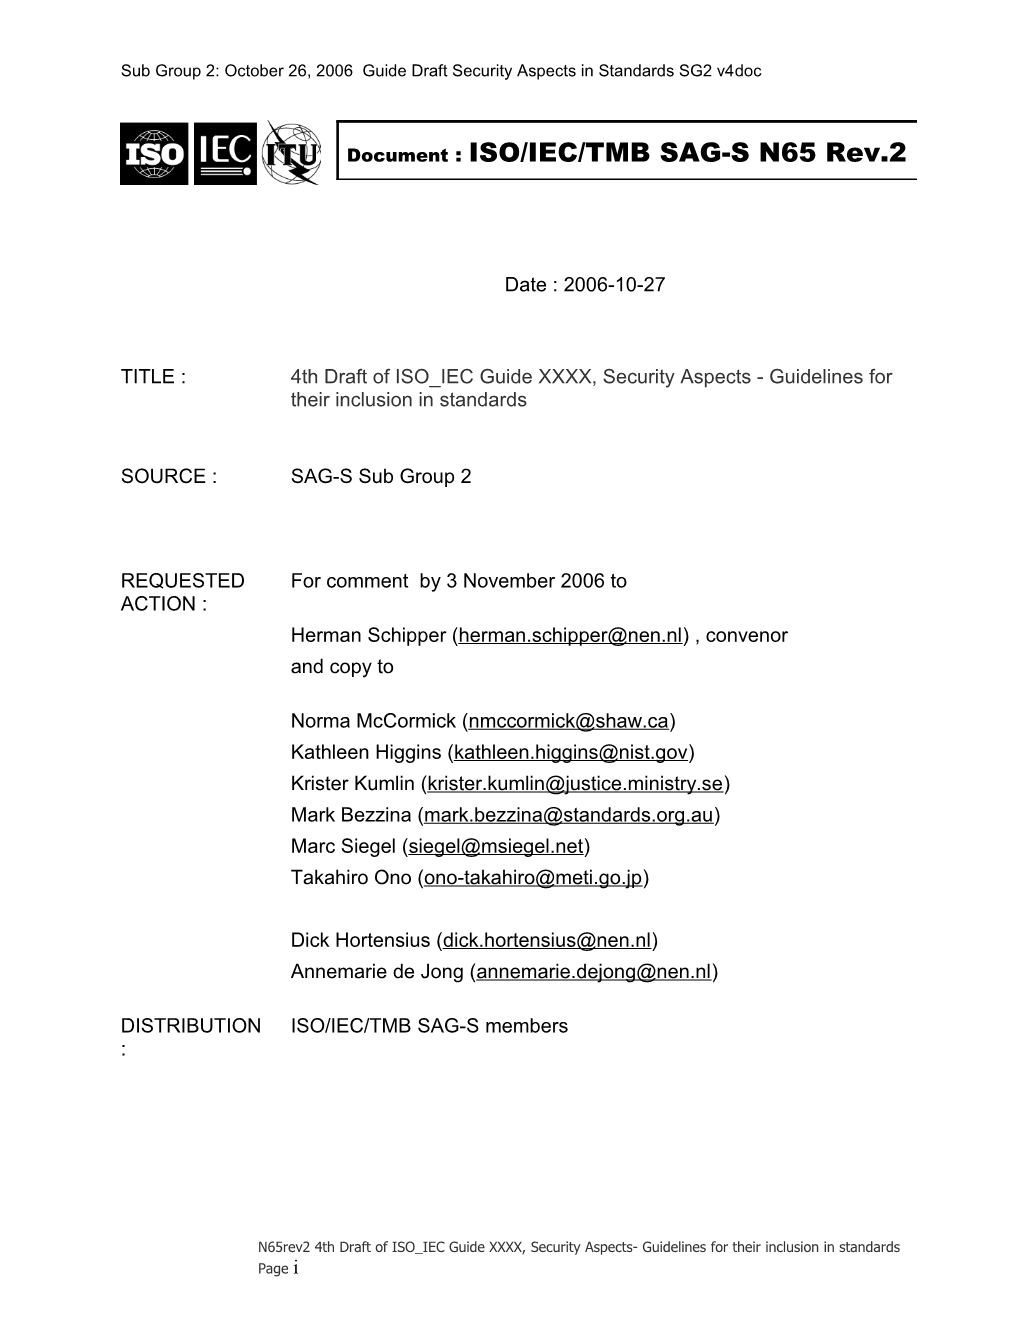 Sub Group 2: October 26, 2006 Guide Draft Security Aspects in Standards SG2 V4doc